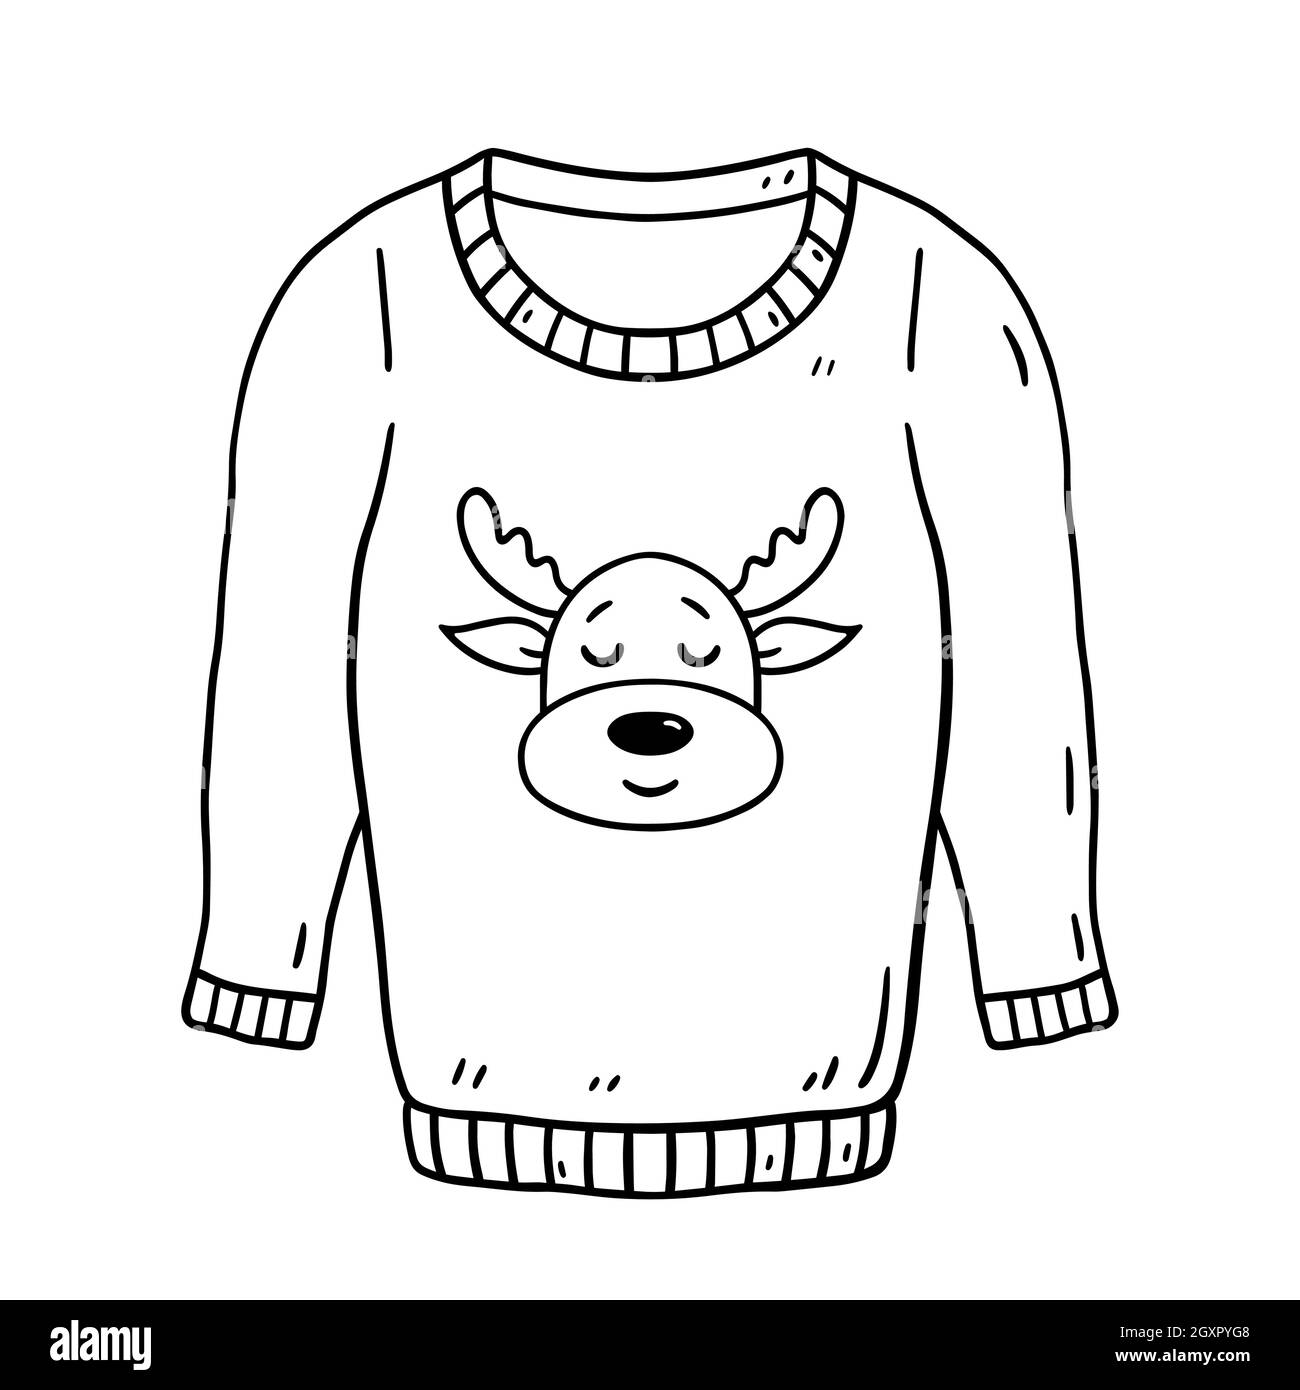 How to Draw a Sweater  Step by Step Easy Drawing Guides  Drawing Howtos